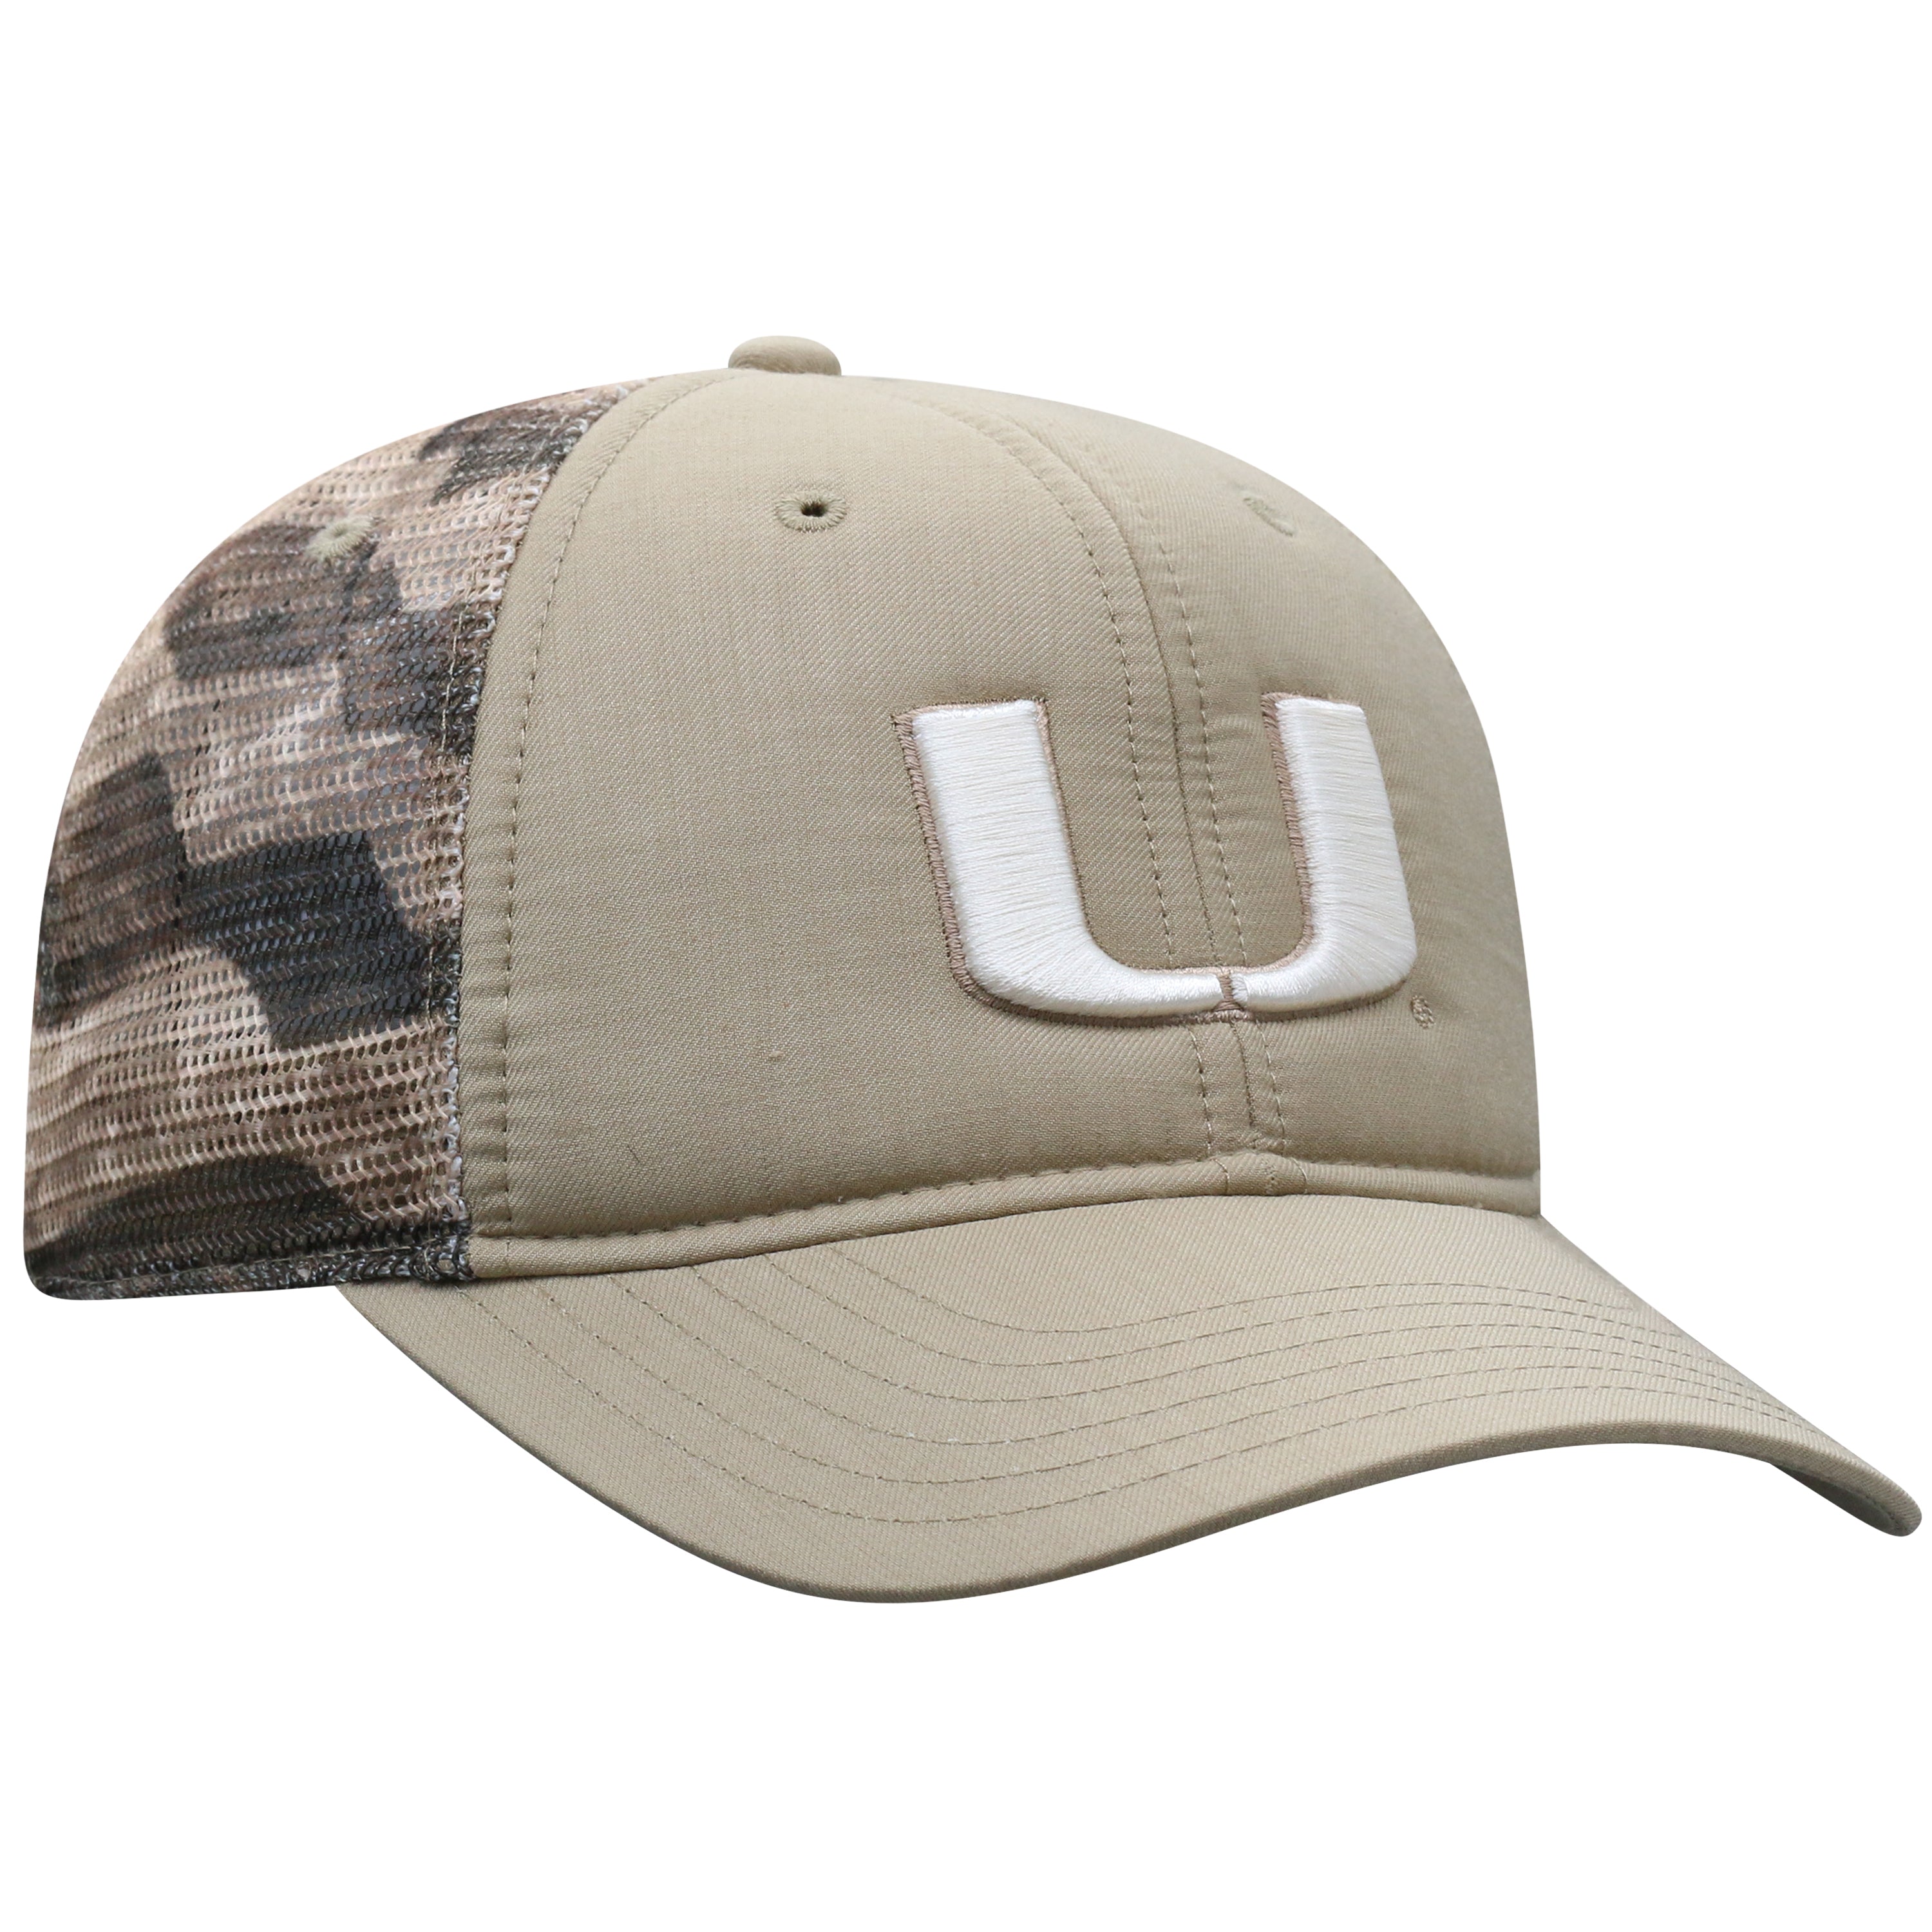 Miami Hurricanes Top of the World Sanders Adjustable Two-Tone - Beige